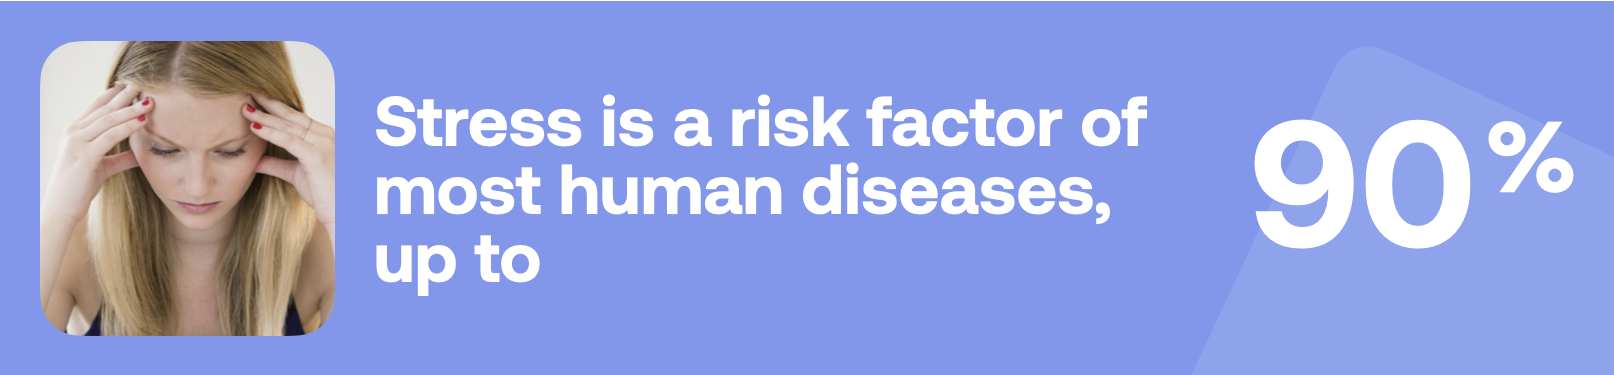 Stress is a risk factor of most human diseases, up to 90%